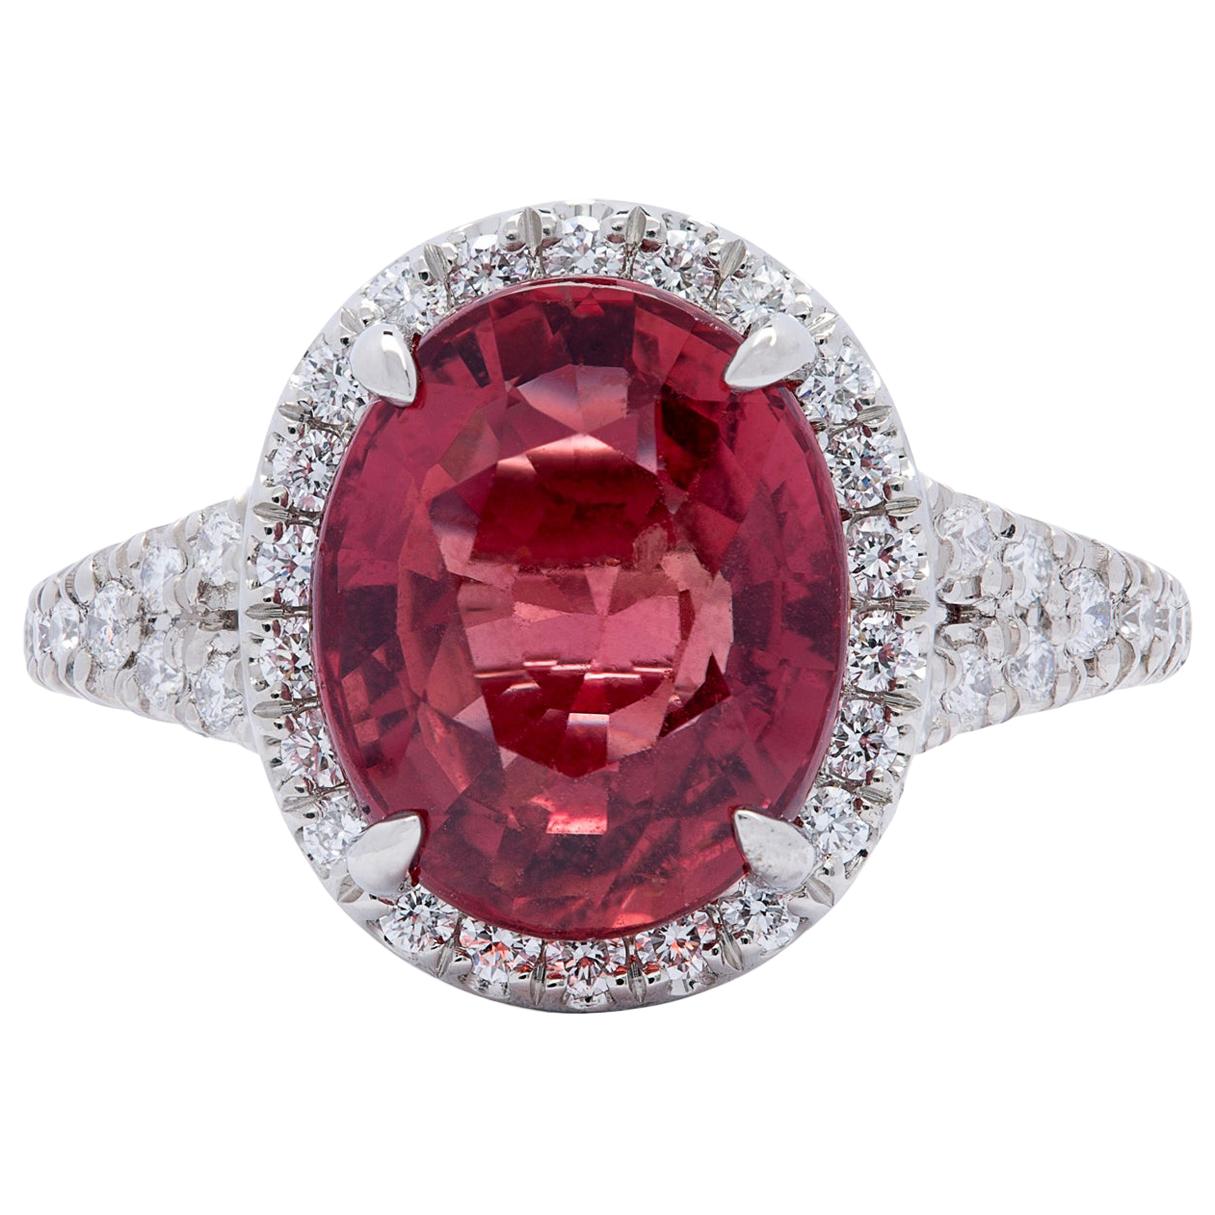 Extremely Rare No Heat GIA 5.10 Carat Red-Orange Sapphire Diamond Ring For Sale